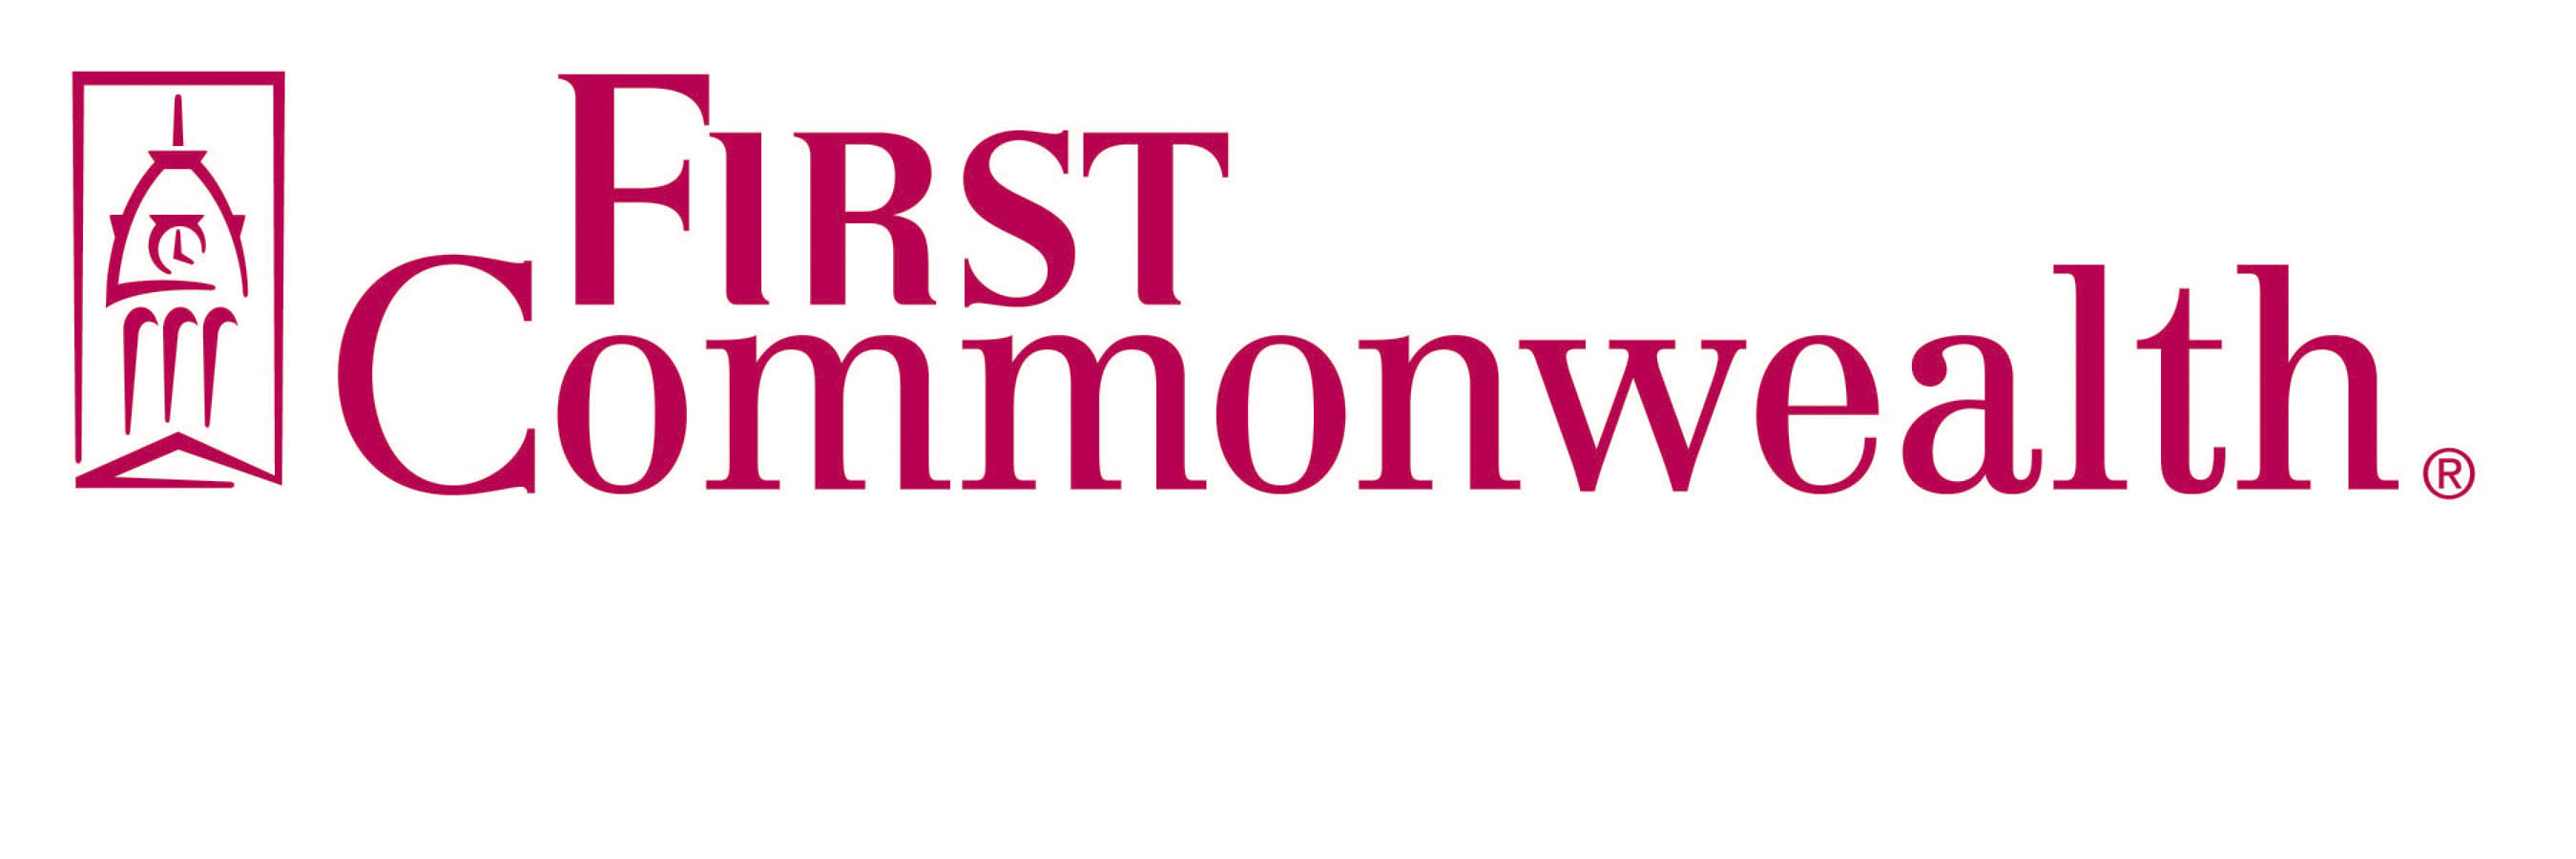 First Commonwealth Financial Corporation logo.